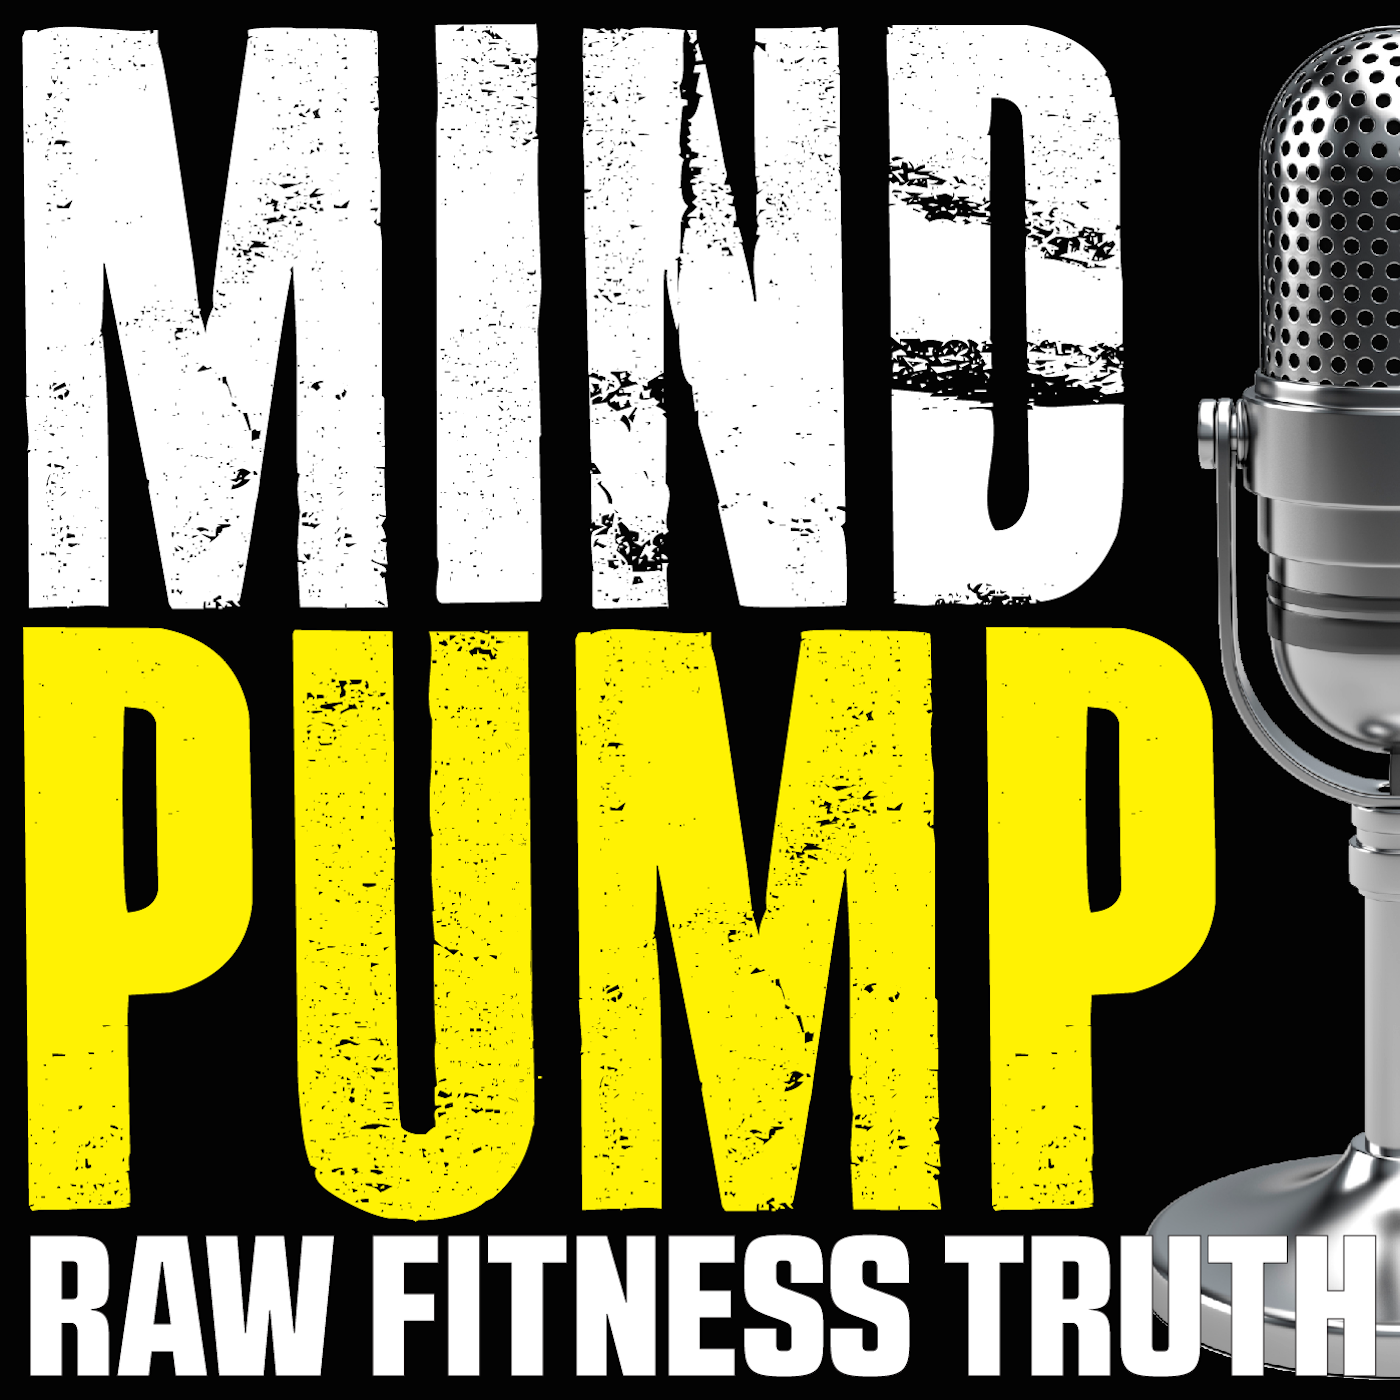 292: Pre-Intra-Post Workout Nutrition